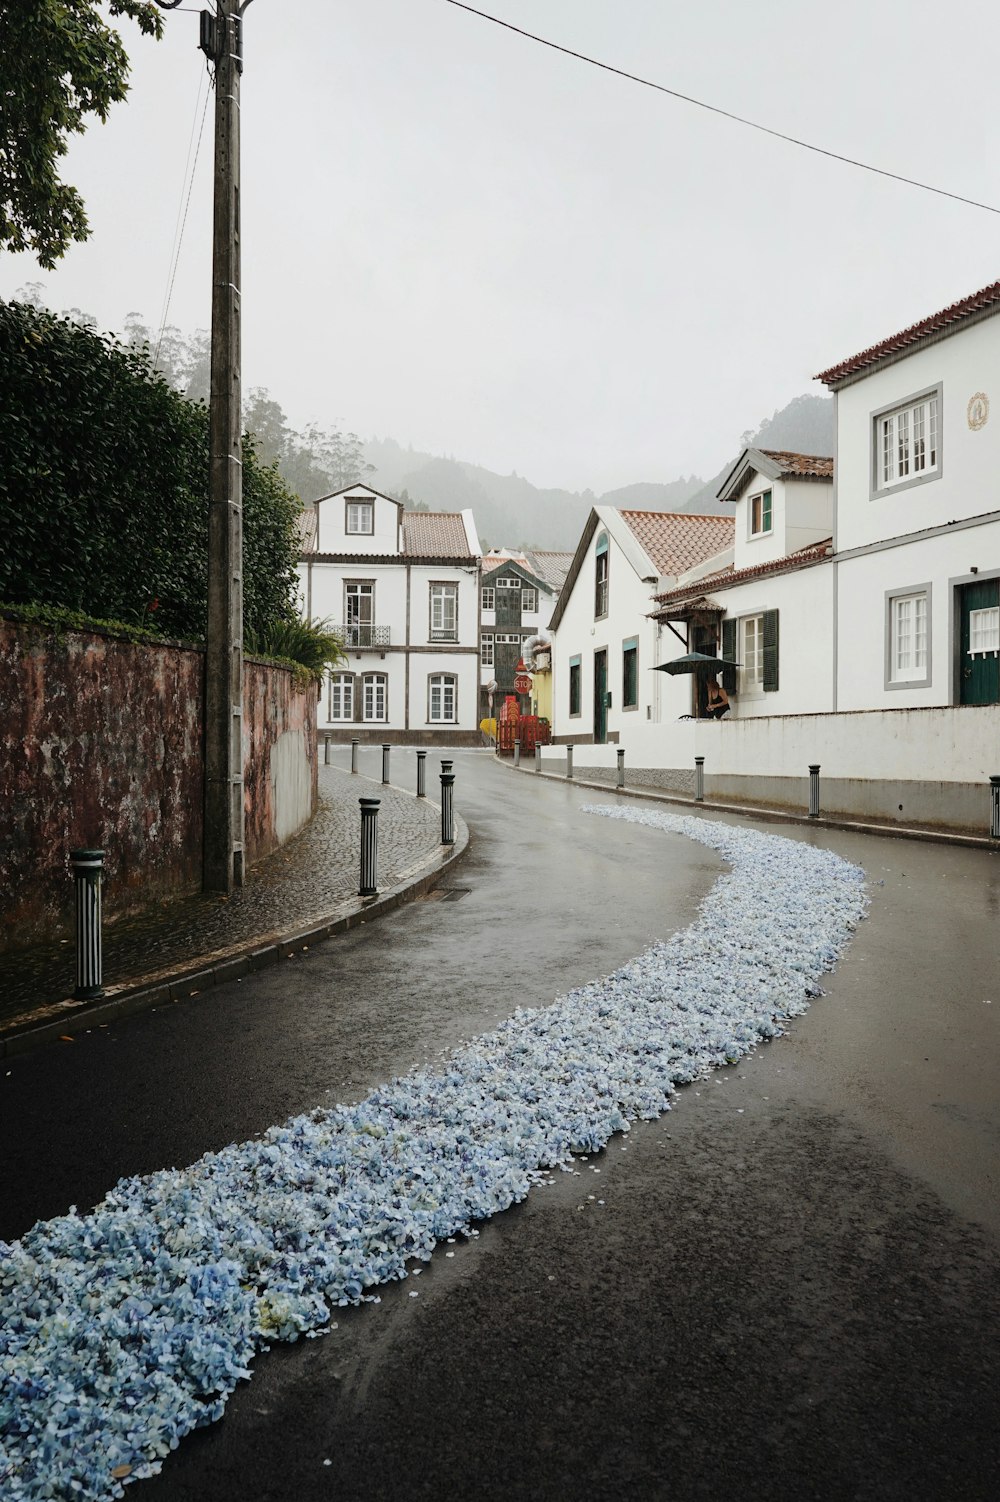 road with blue ornaments beside houses